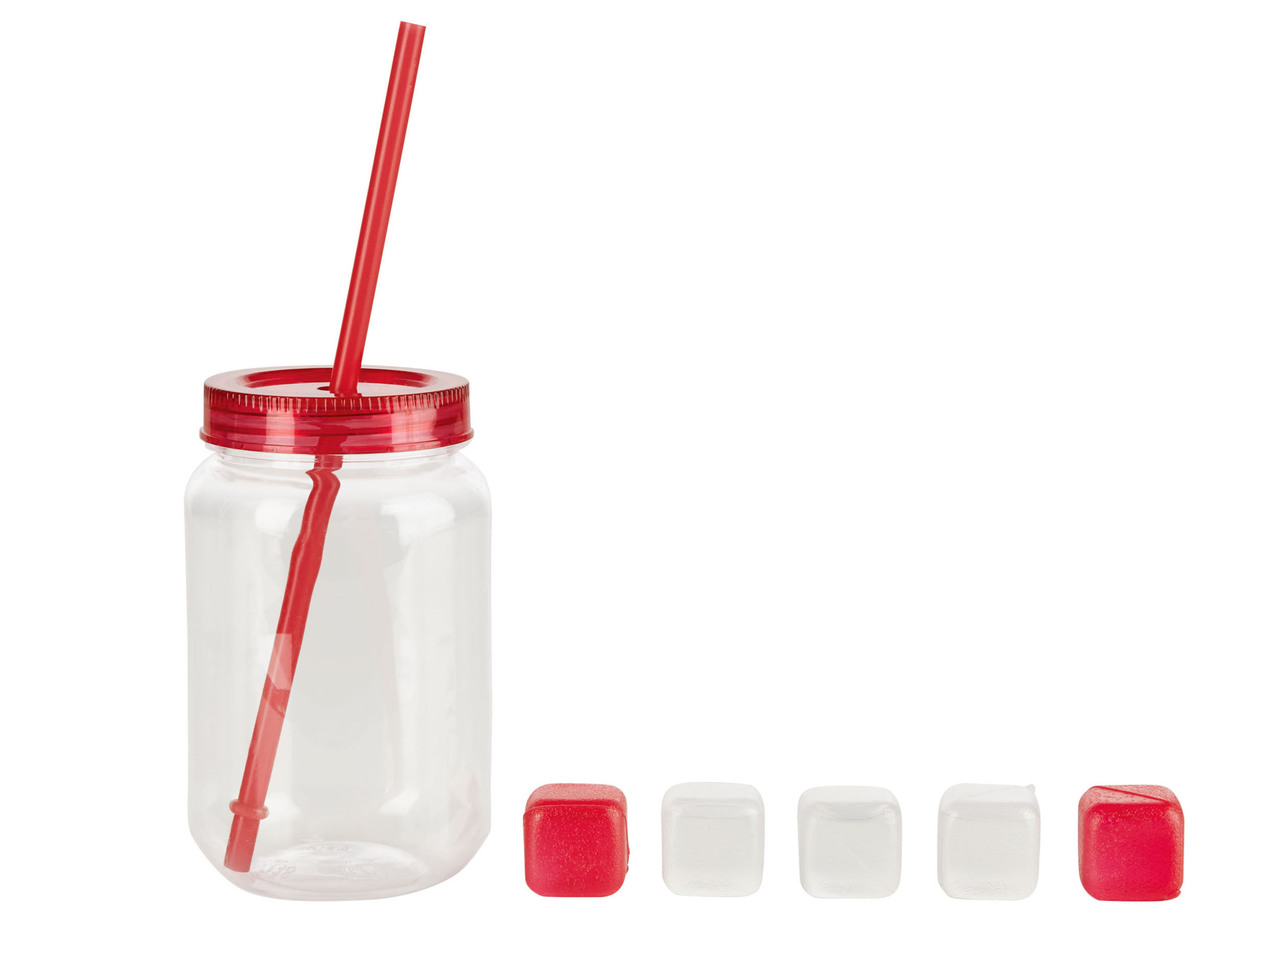 Drinks Dispenser with Cool Block or Drinks Container Set with Ice Cubes